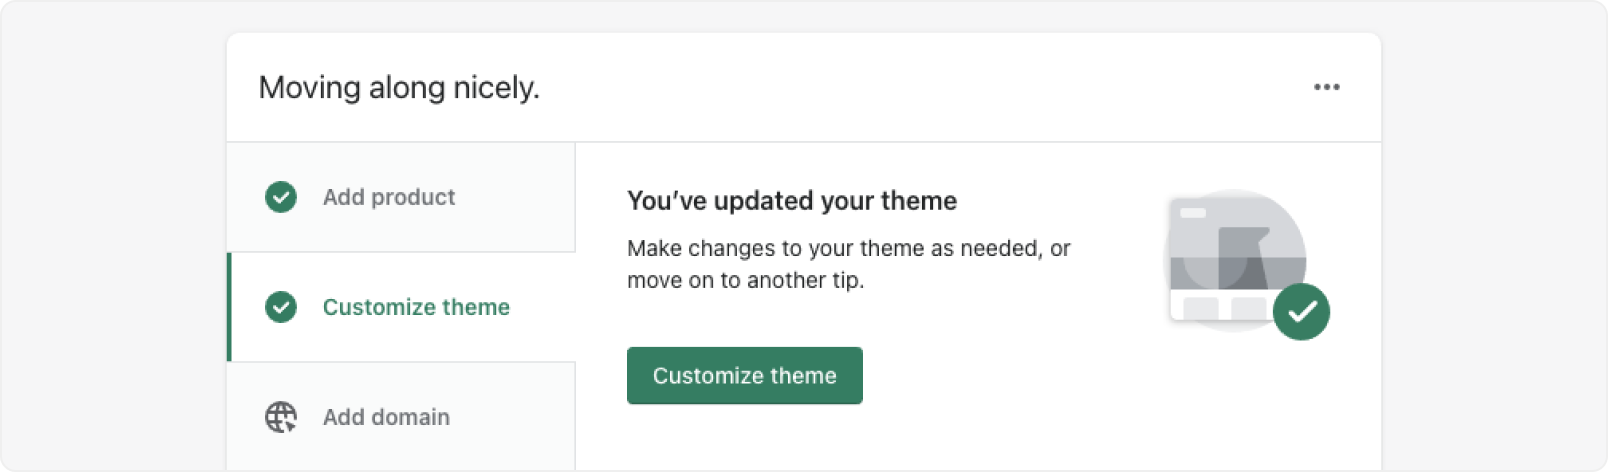 An admin homecard with a small illustration next to some text describing how to customize a theme.